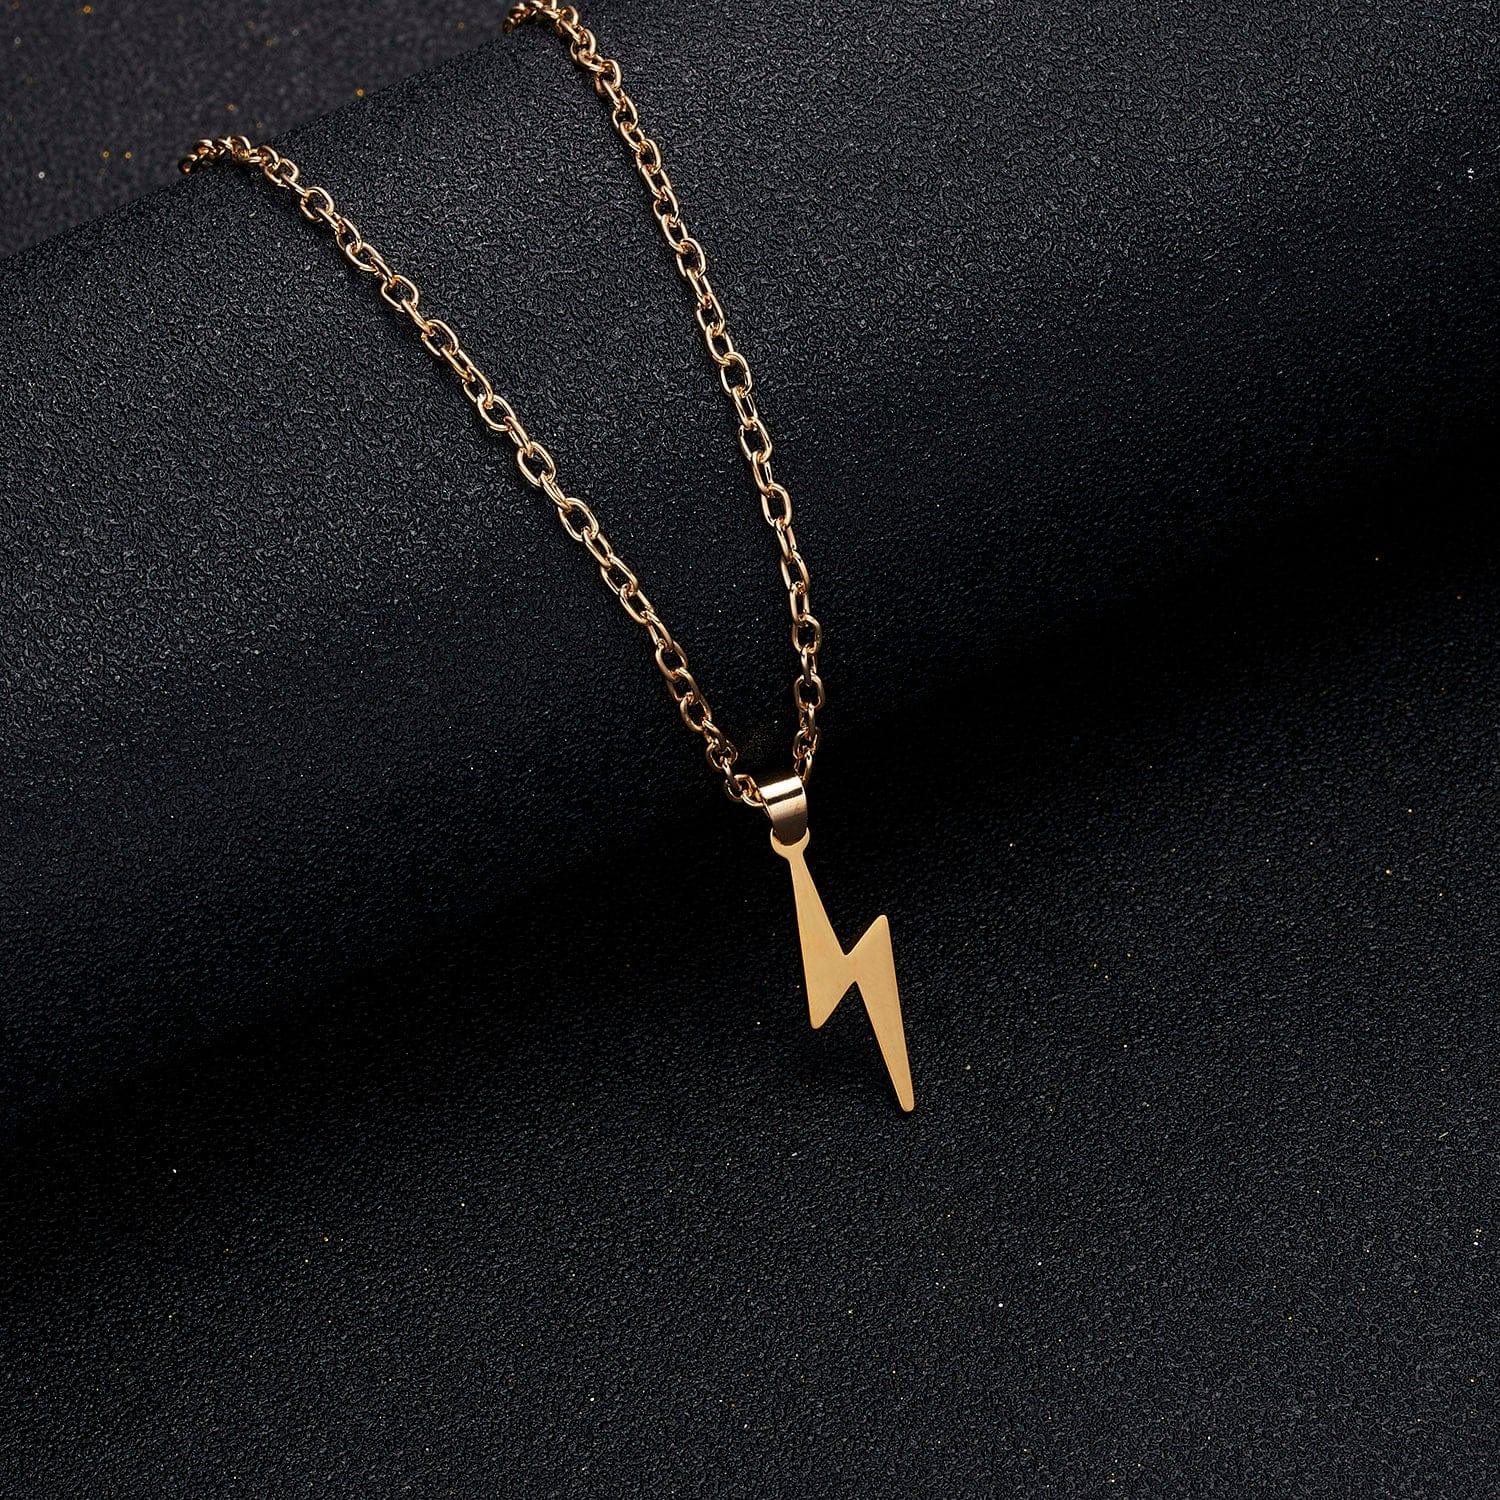 Parker stainless steel necklace - VERSO QUALITY MATERIALS